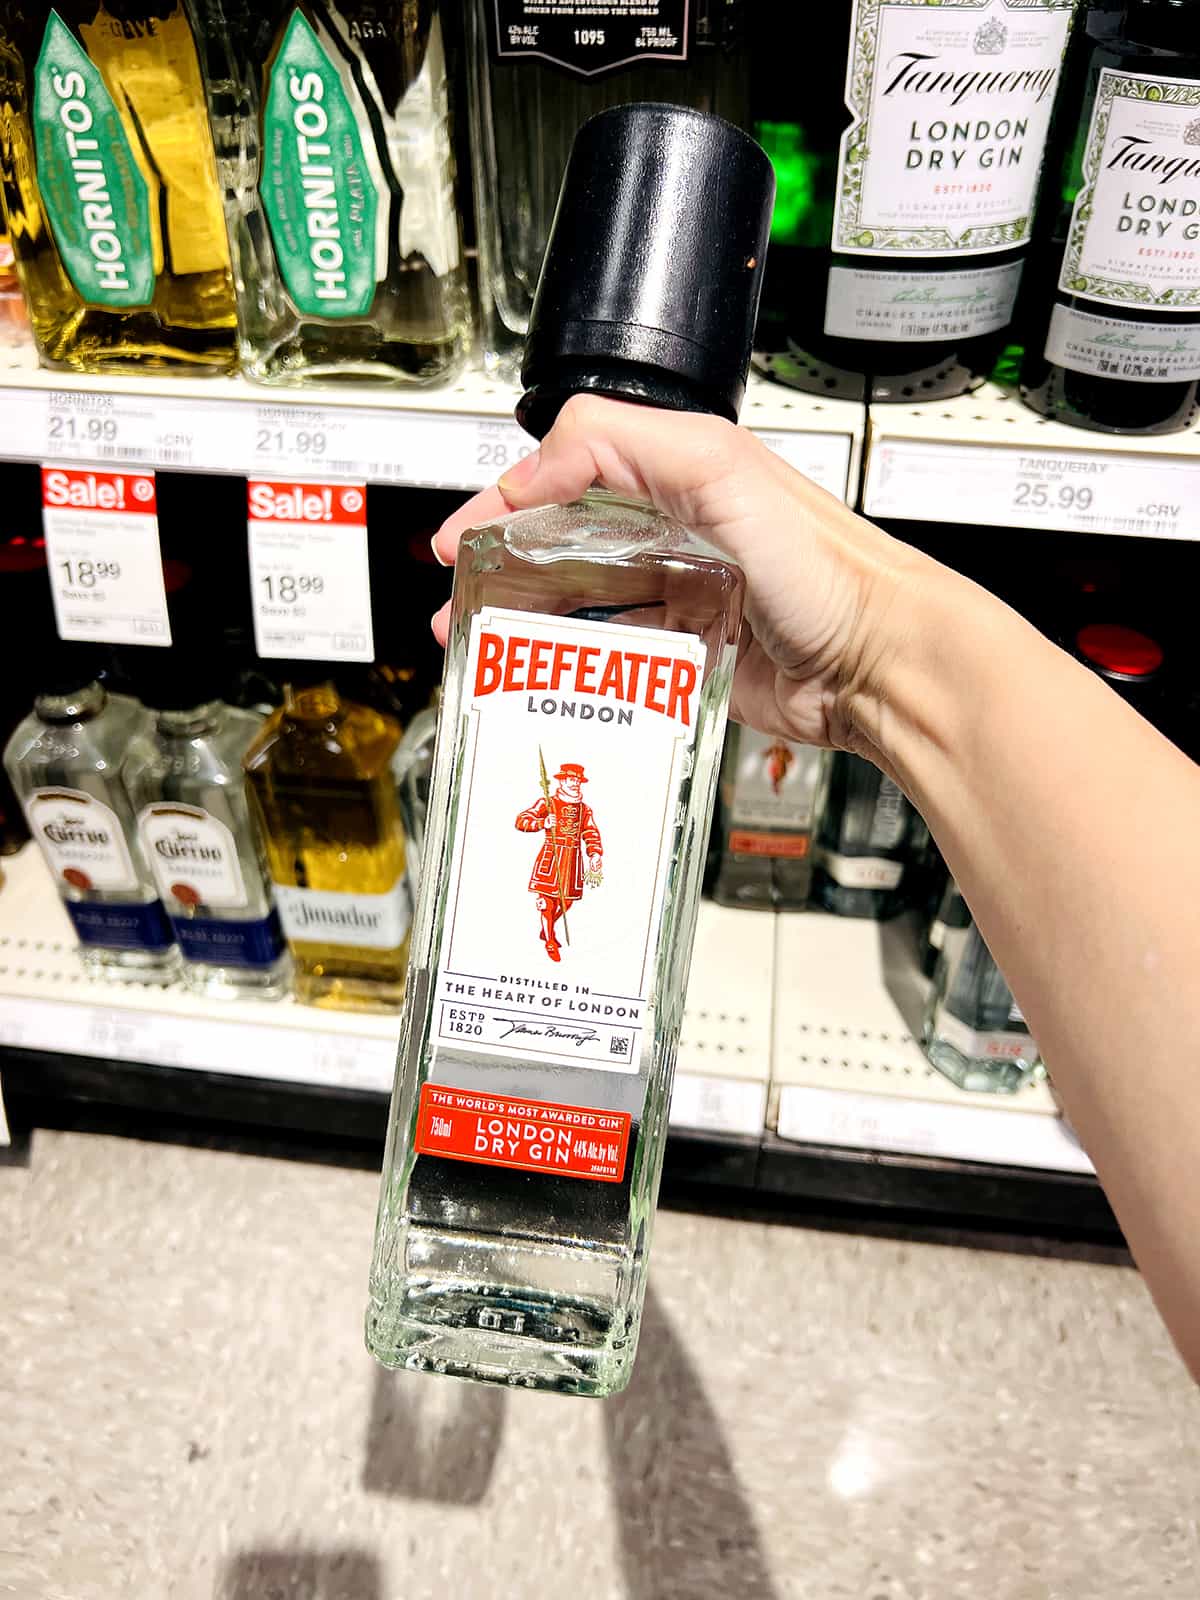 hand holding bottle of beefeater gin in grocery store aisle